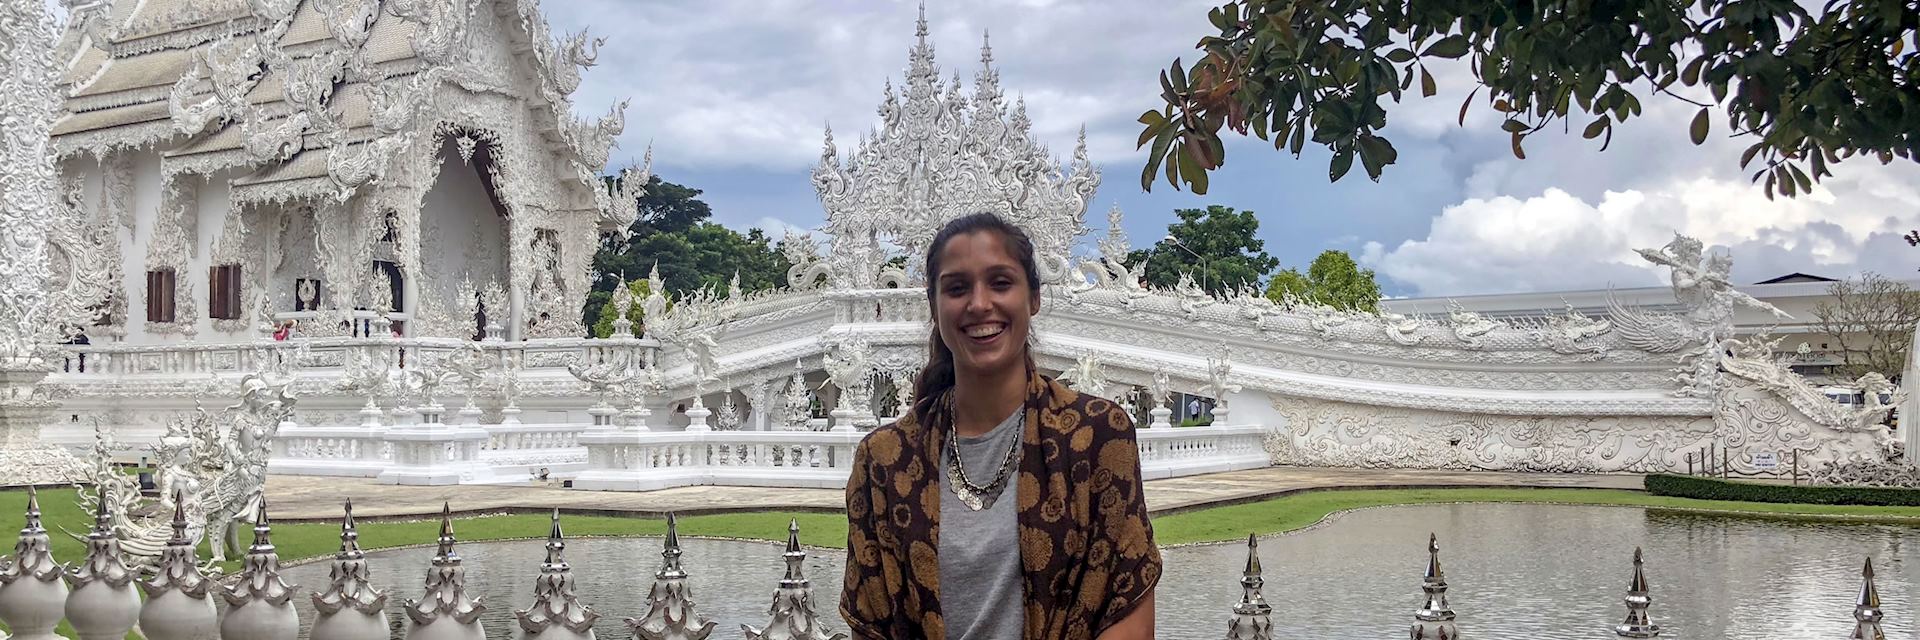 Alix in Chiang Mai, Thailand